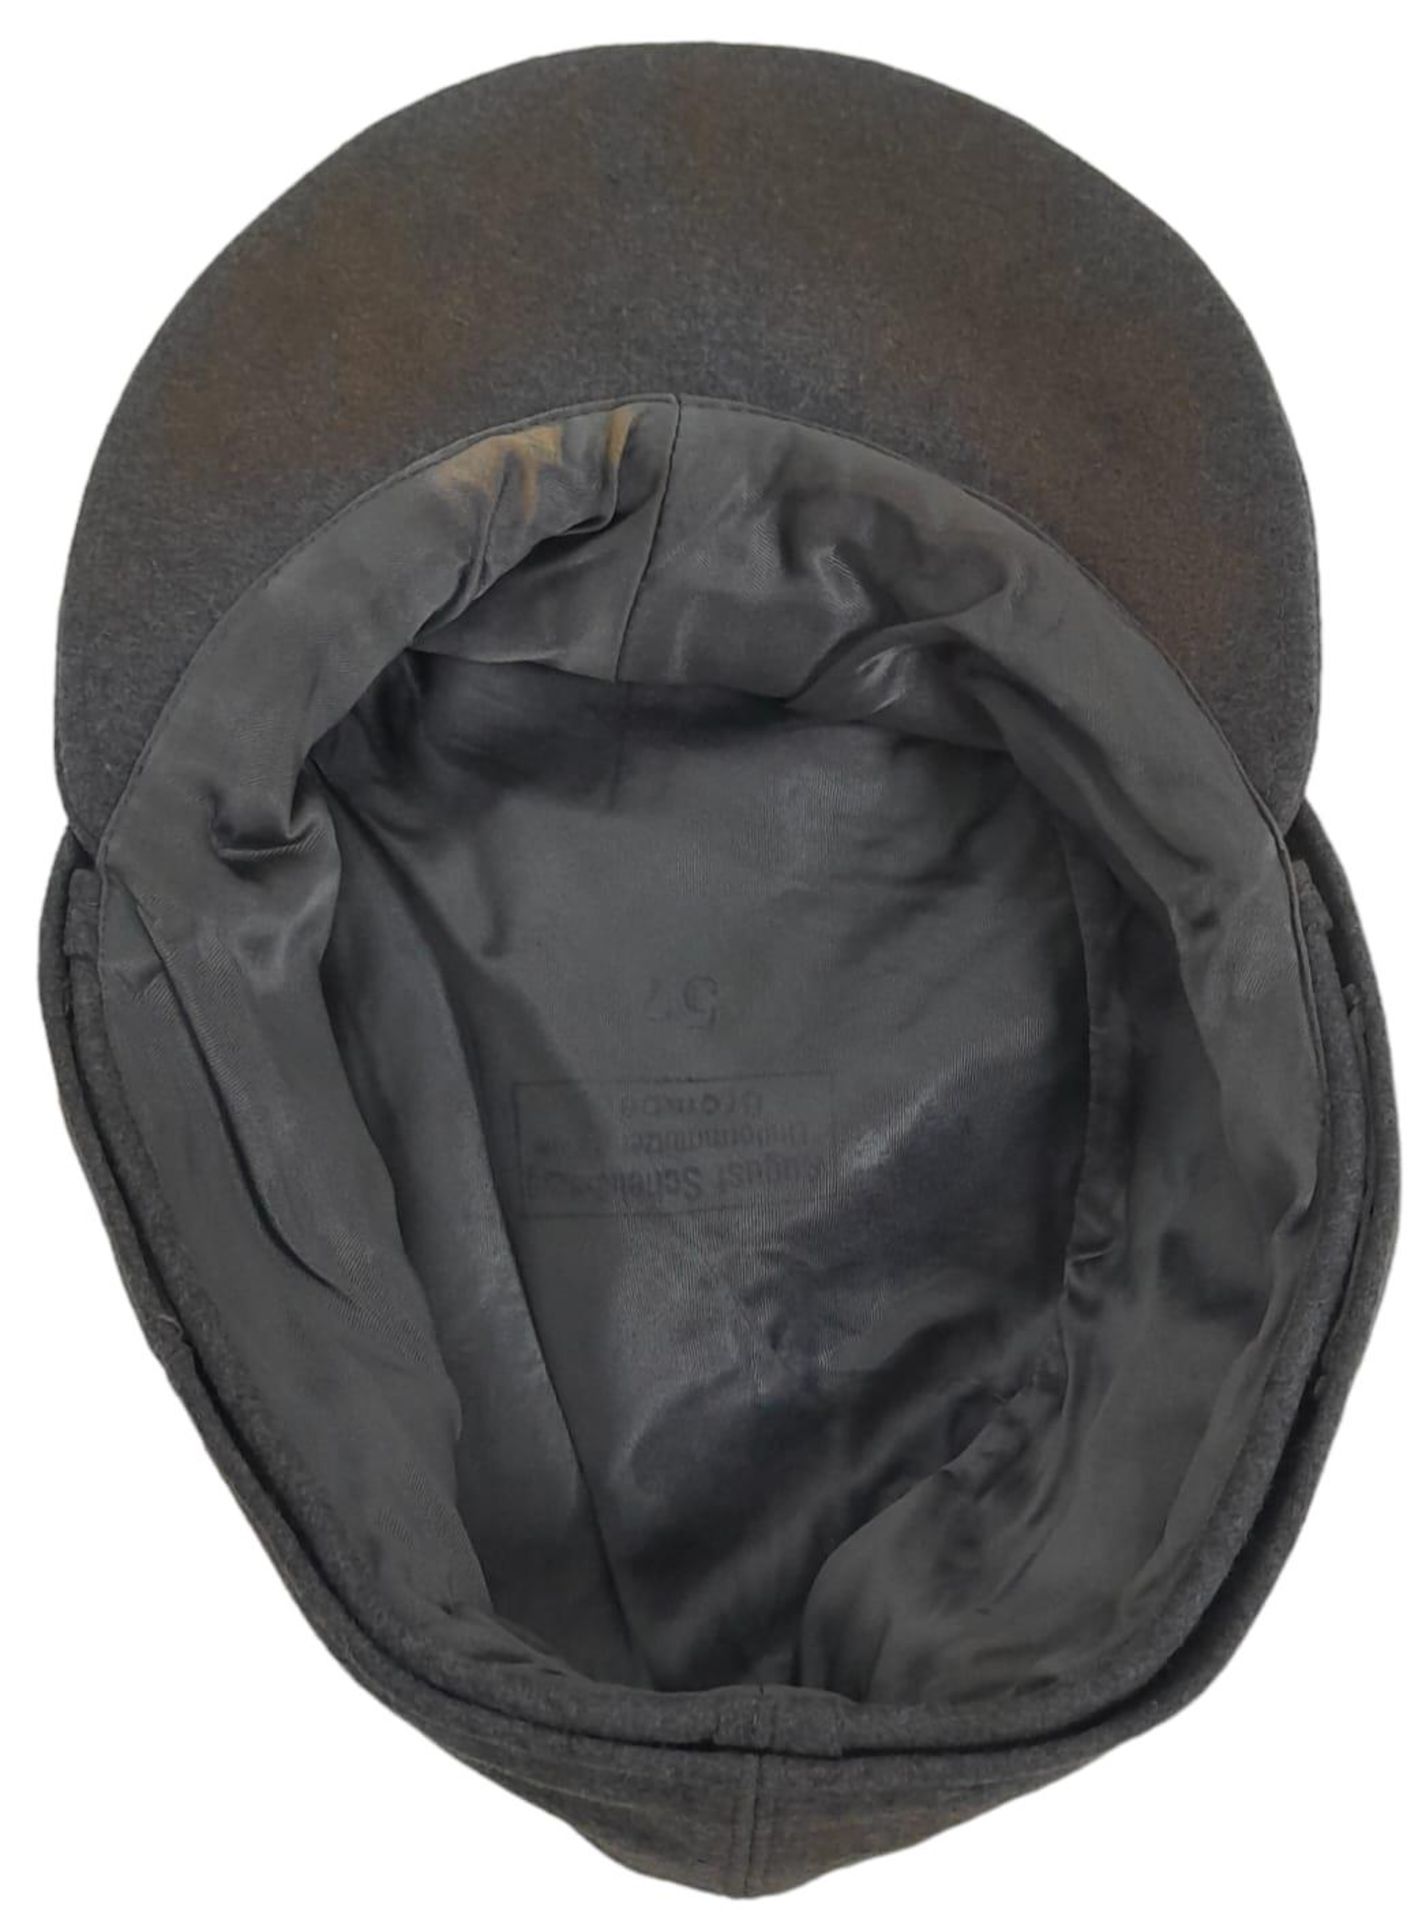 WW2 German Luftwaffe Enlisted Mans/Nco’s Private Purchase M43 Cap. - Image 9 of 11